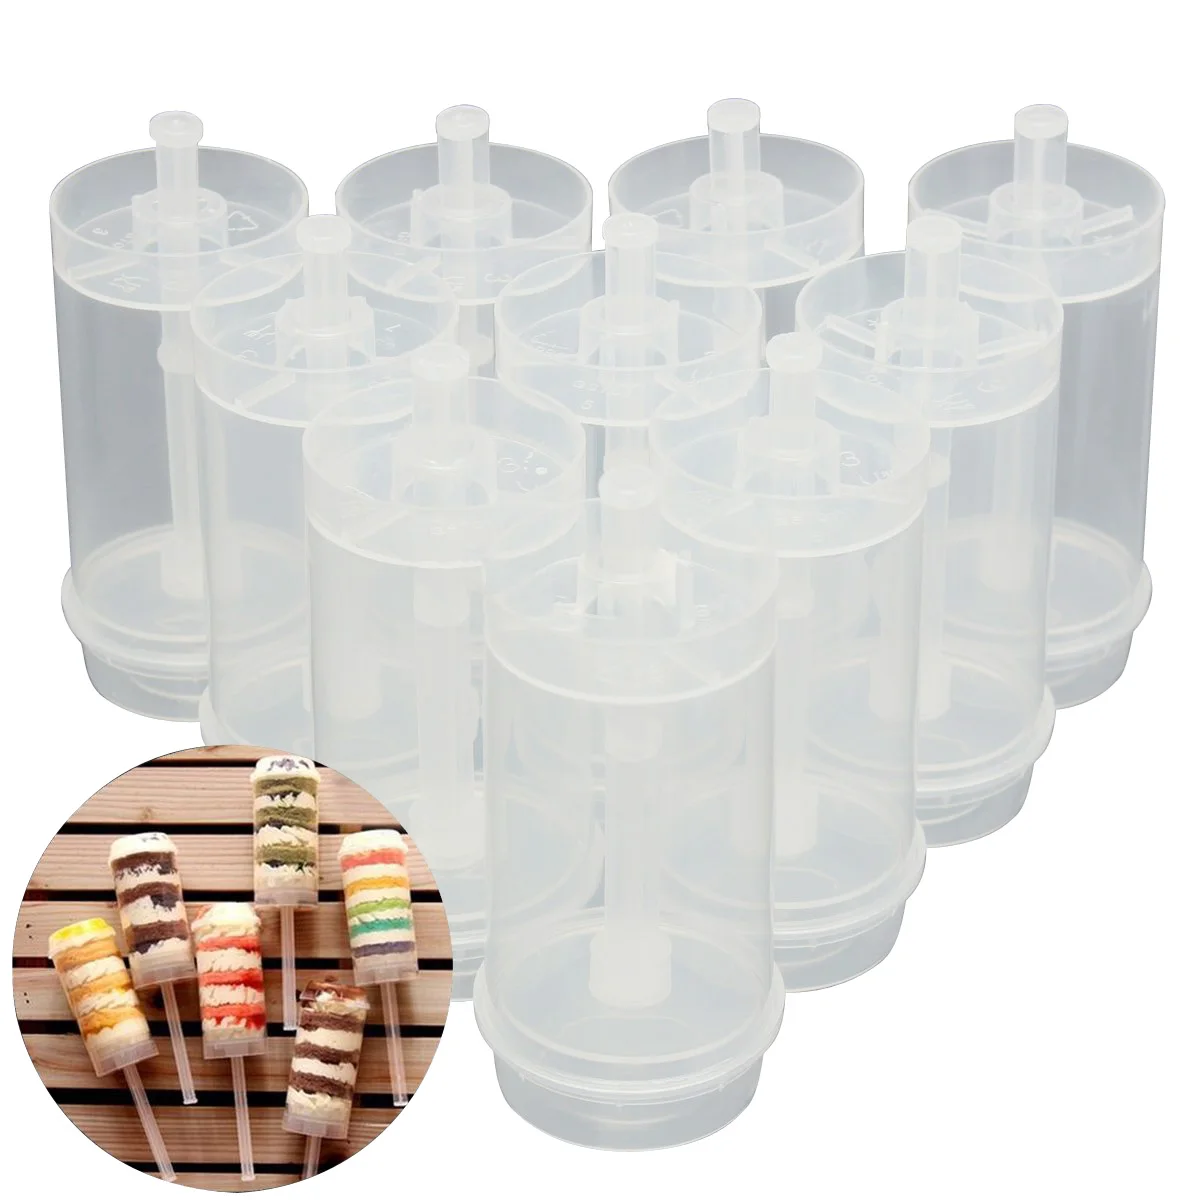 50x Cakes Dessert Push Up Pop Containers Shooter Pop for Party Use 